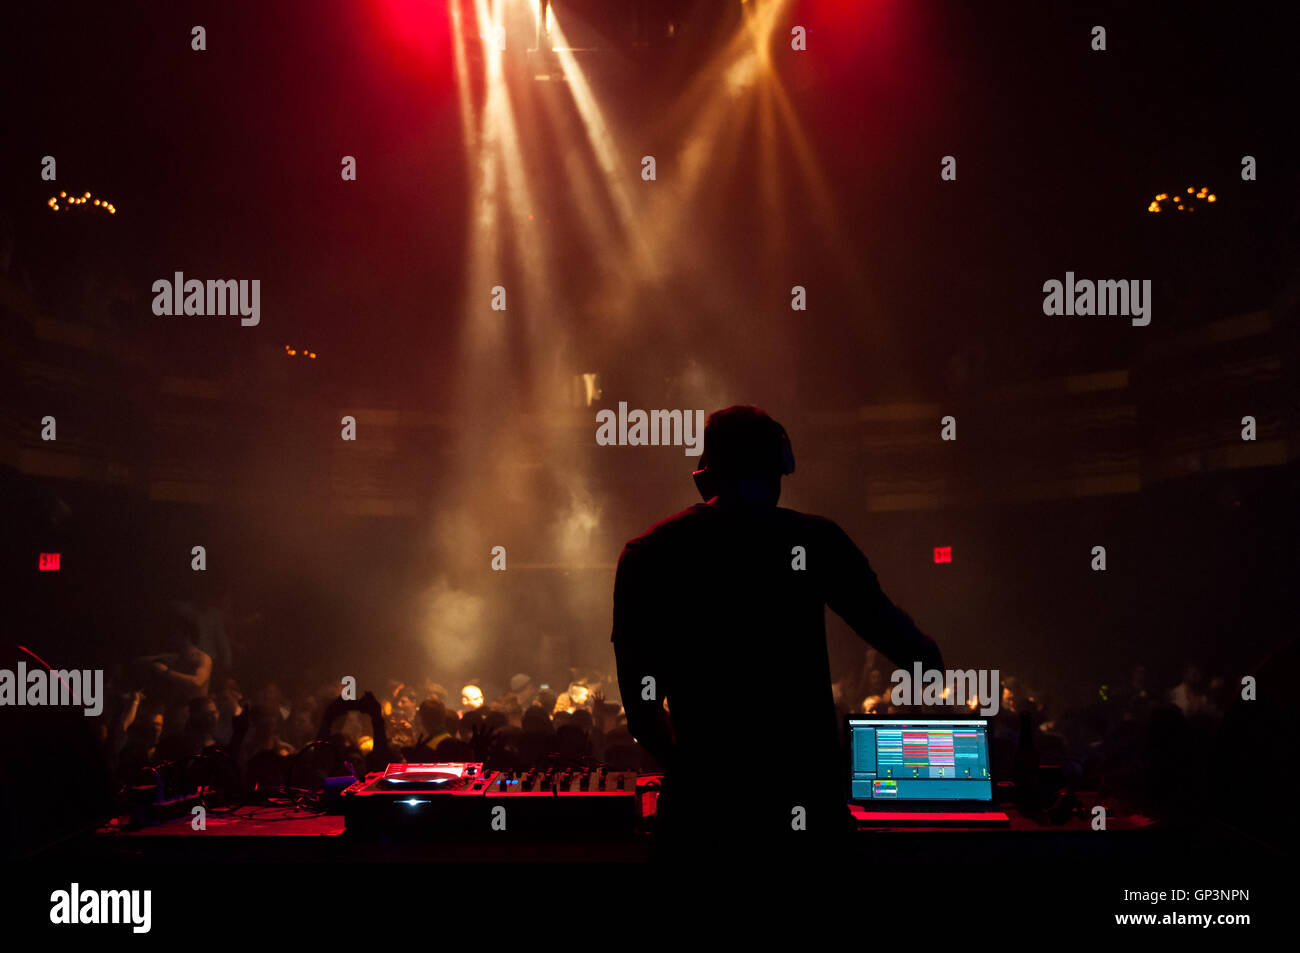 A DJ performing at a concert Stock Photo